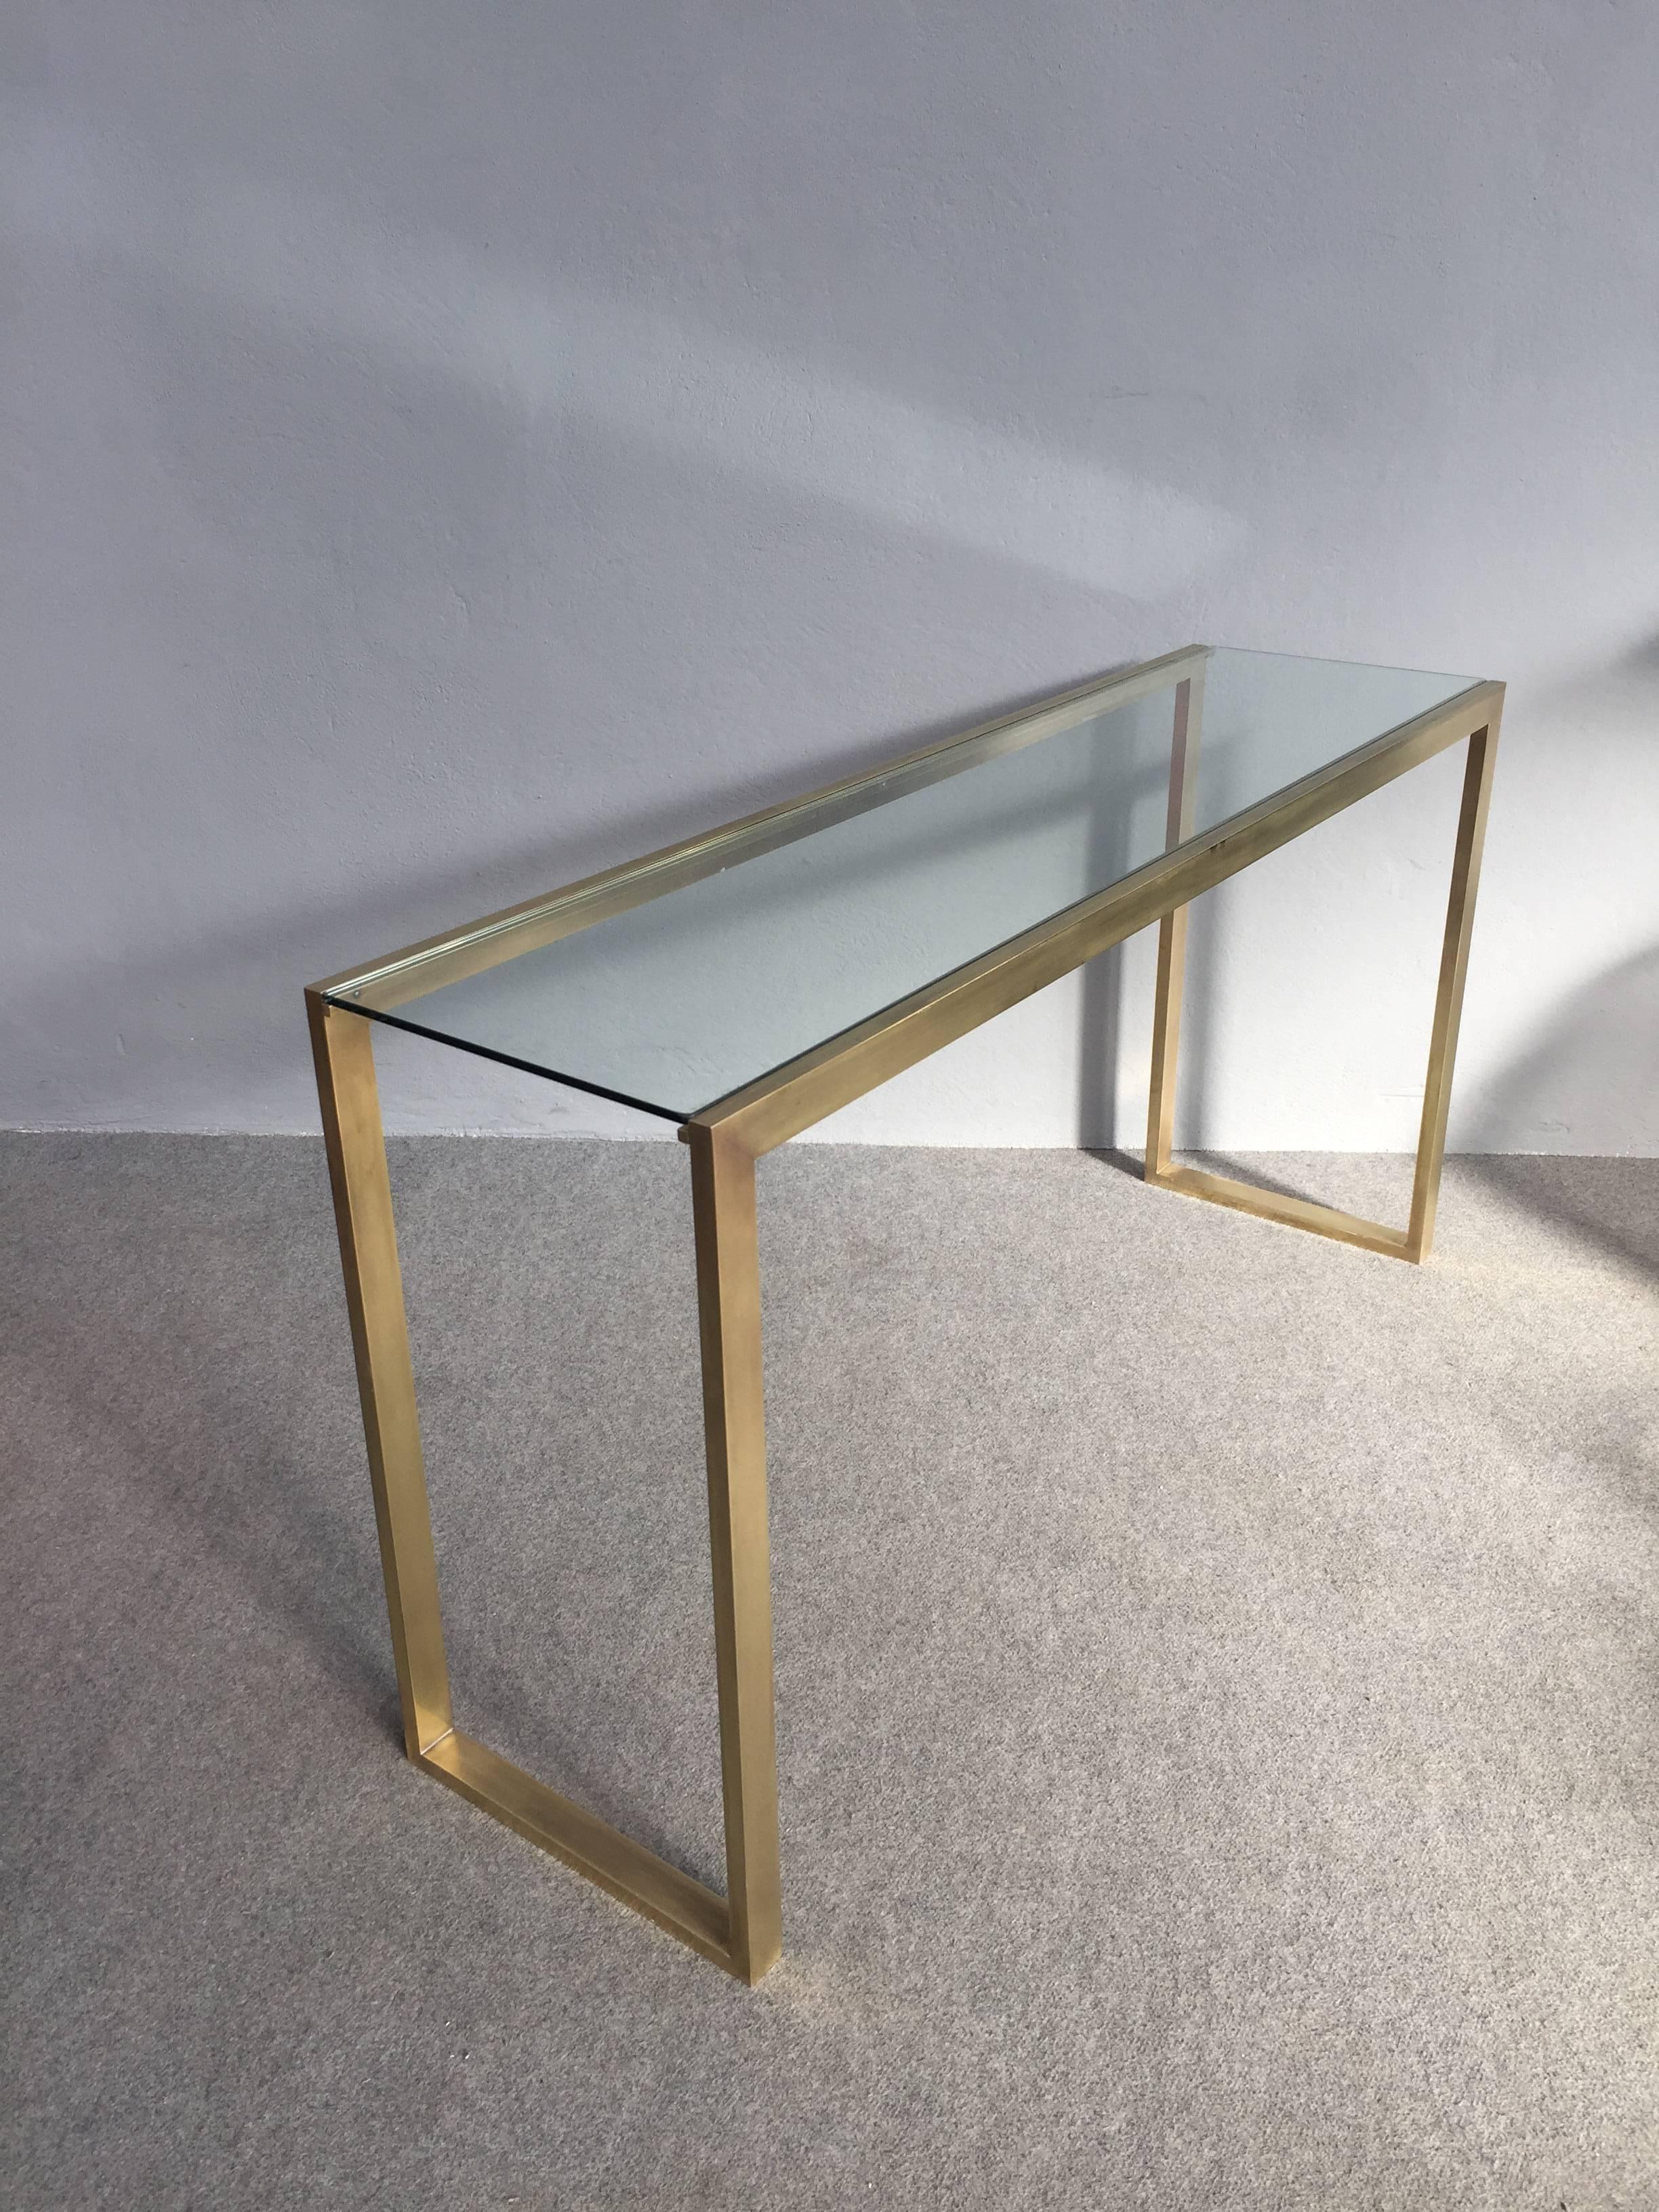 Elegant console table made with solid brass and with glass top.